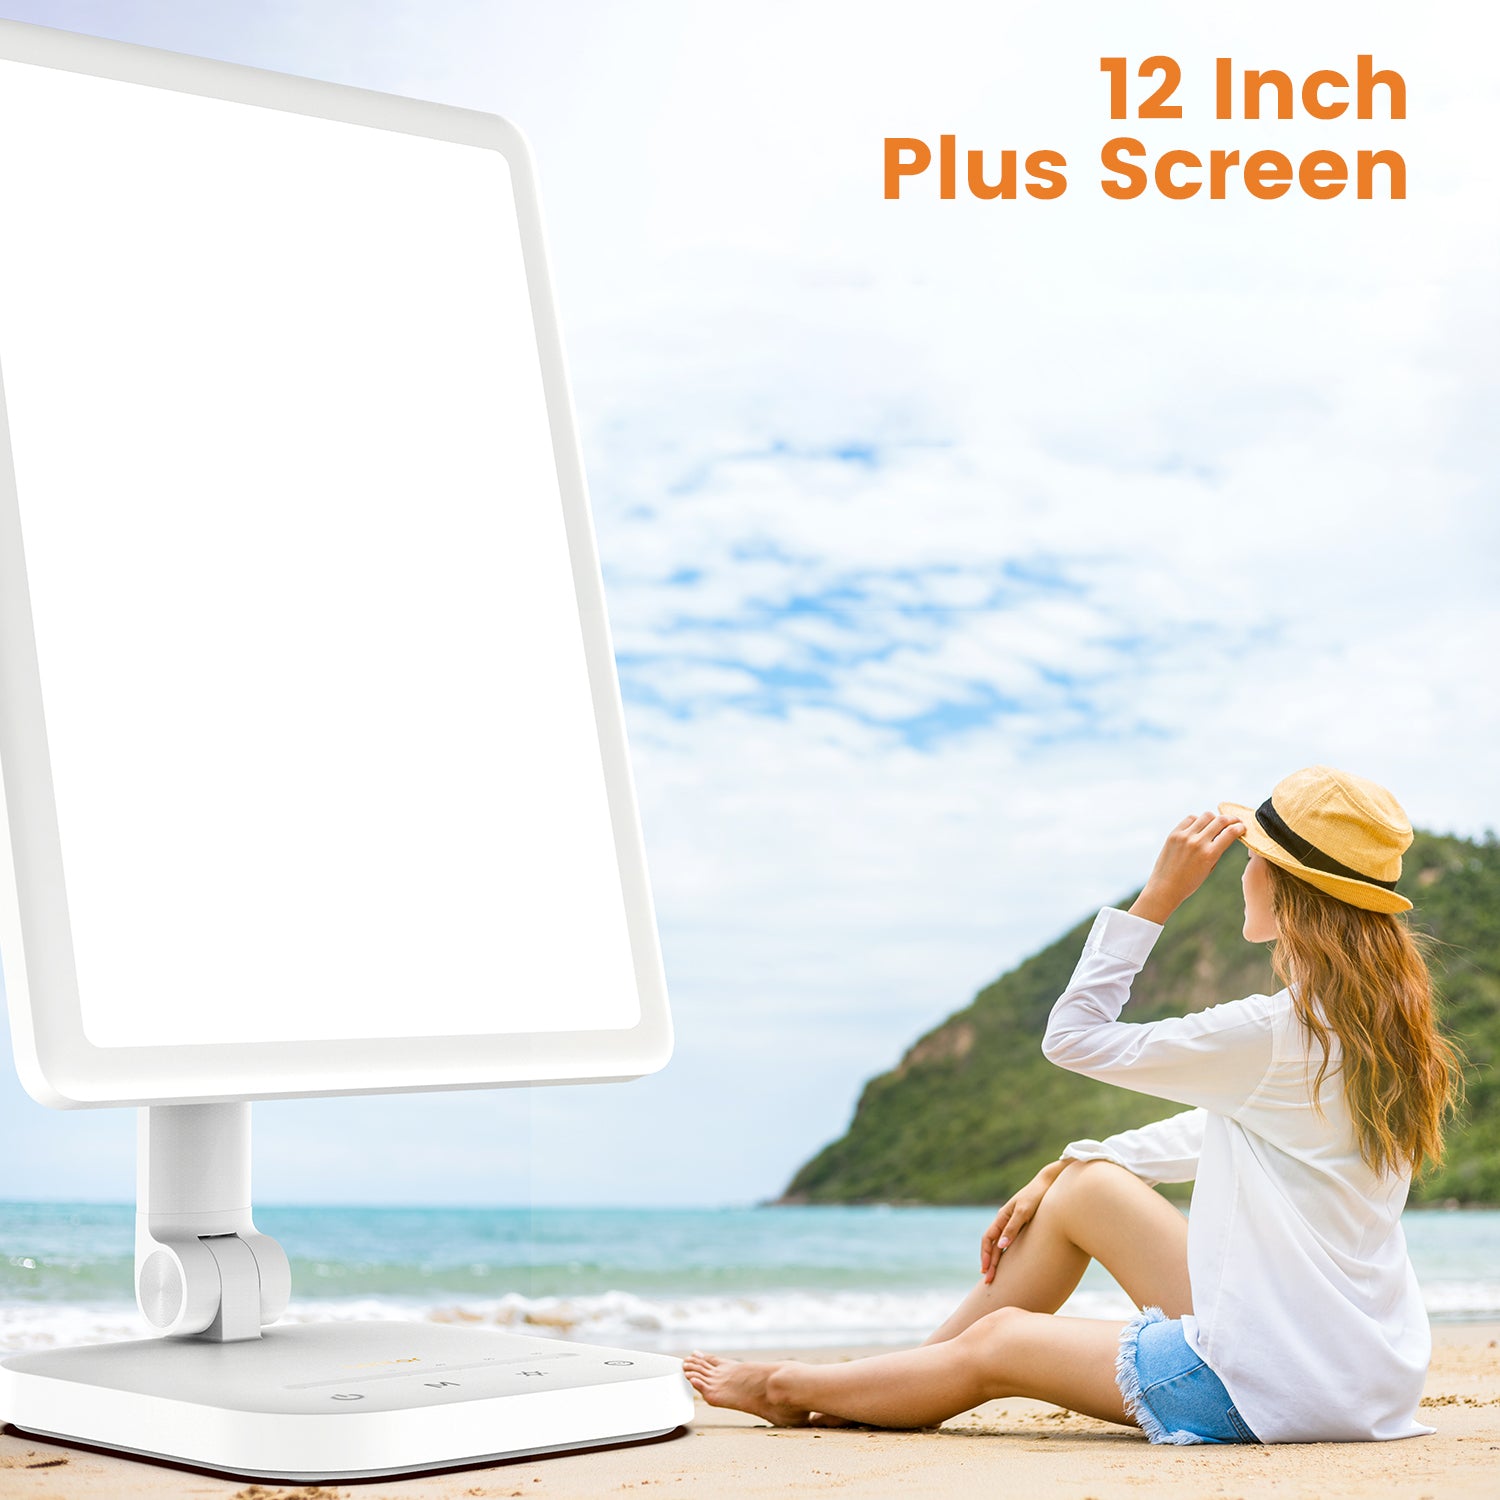 LASTAR Light Therapy Lamp, 12000LUX Therapy Light UV-Free &Full Spectr